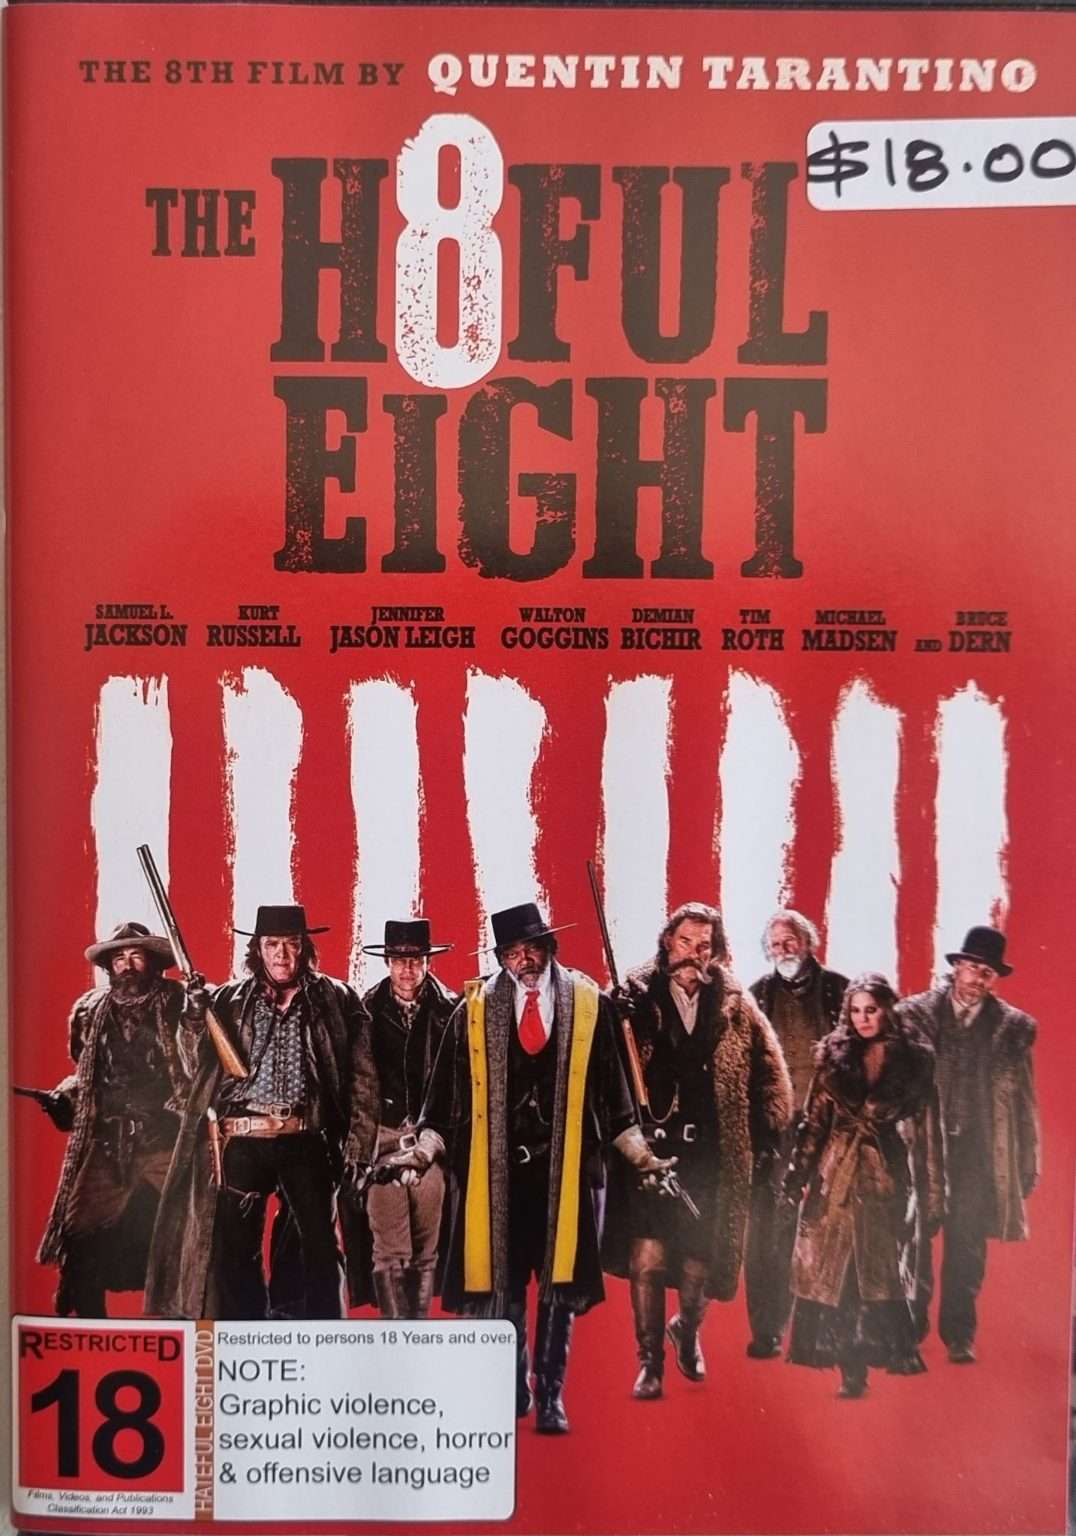 The Hateful Eight H8ful Eight